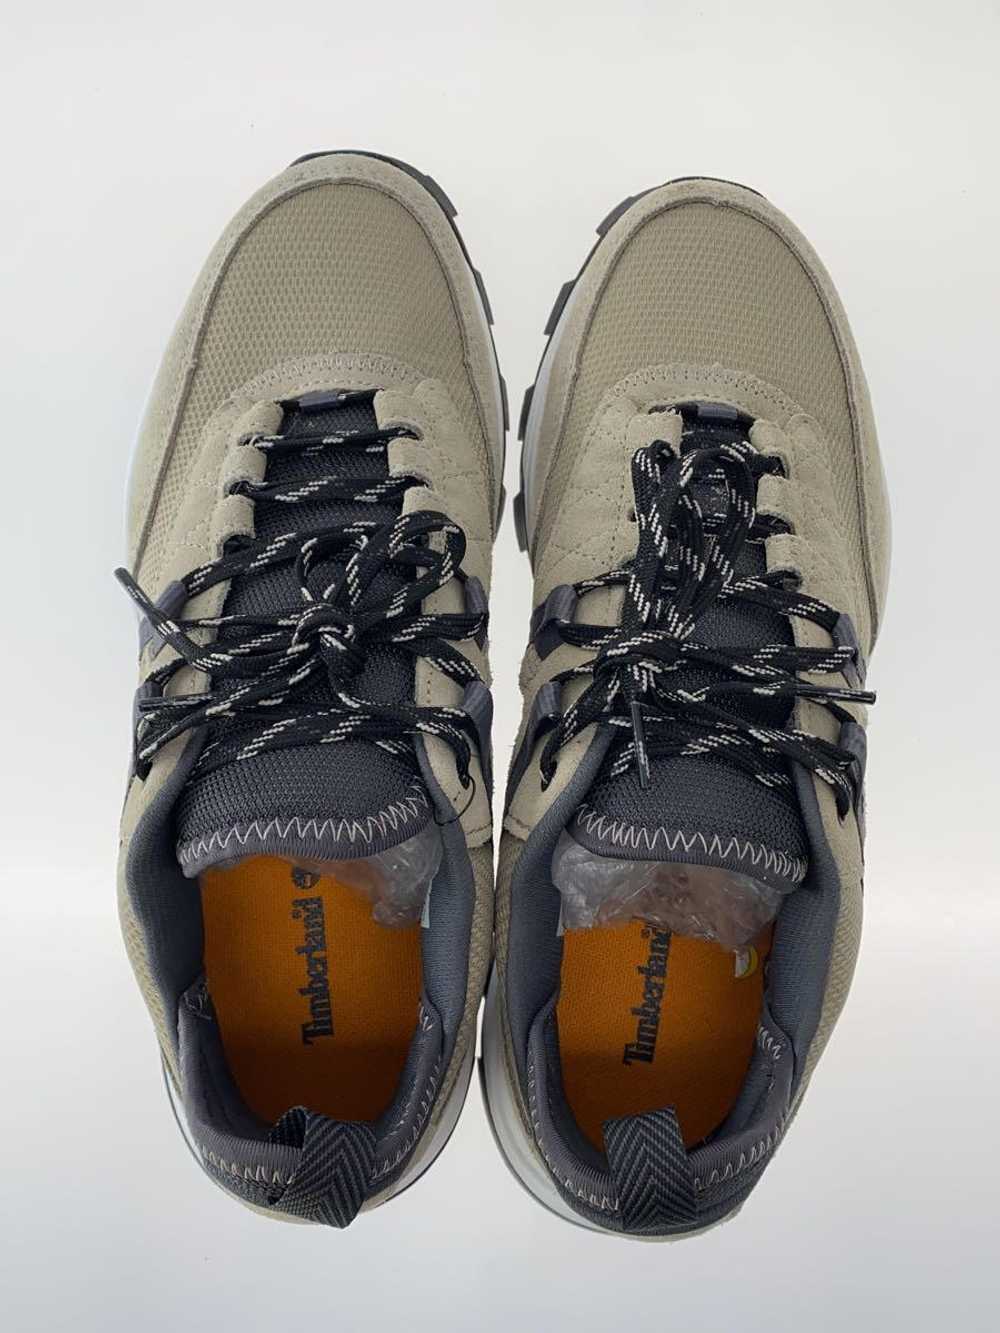 Men 7.5US Timberland Low-Cut Sneakers/Beg/A65G4 - image 3